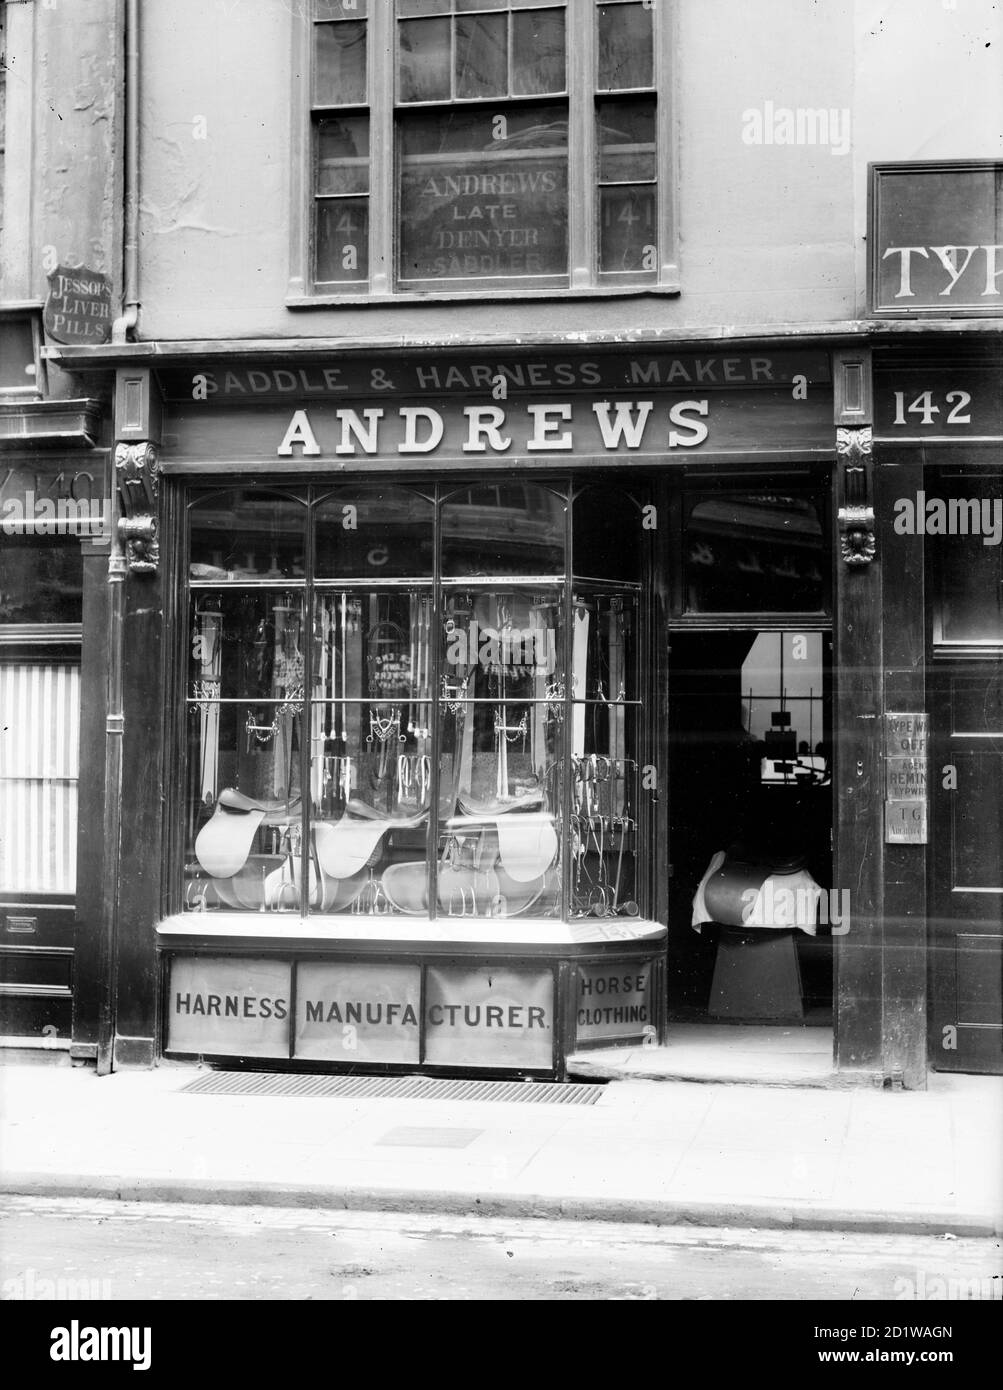 Andrews Shop, High Street, Oxford, Oxfordshire. Exterior view of the frontage of a saddle and harness shop. Stock Photo